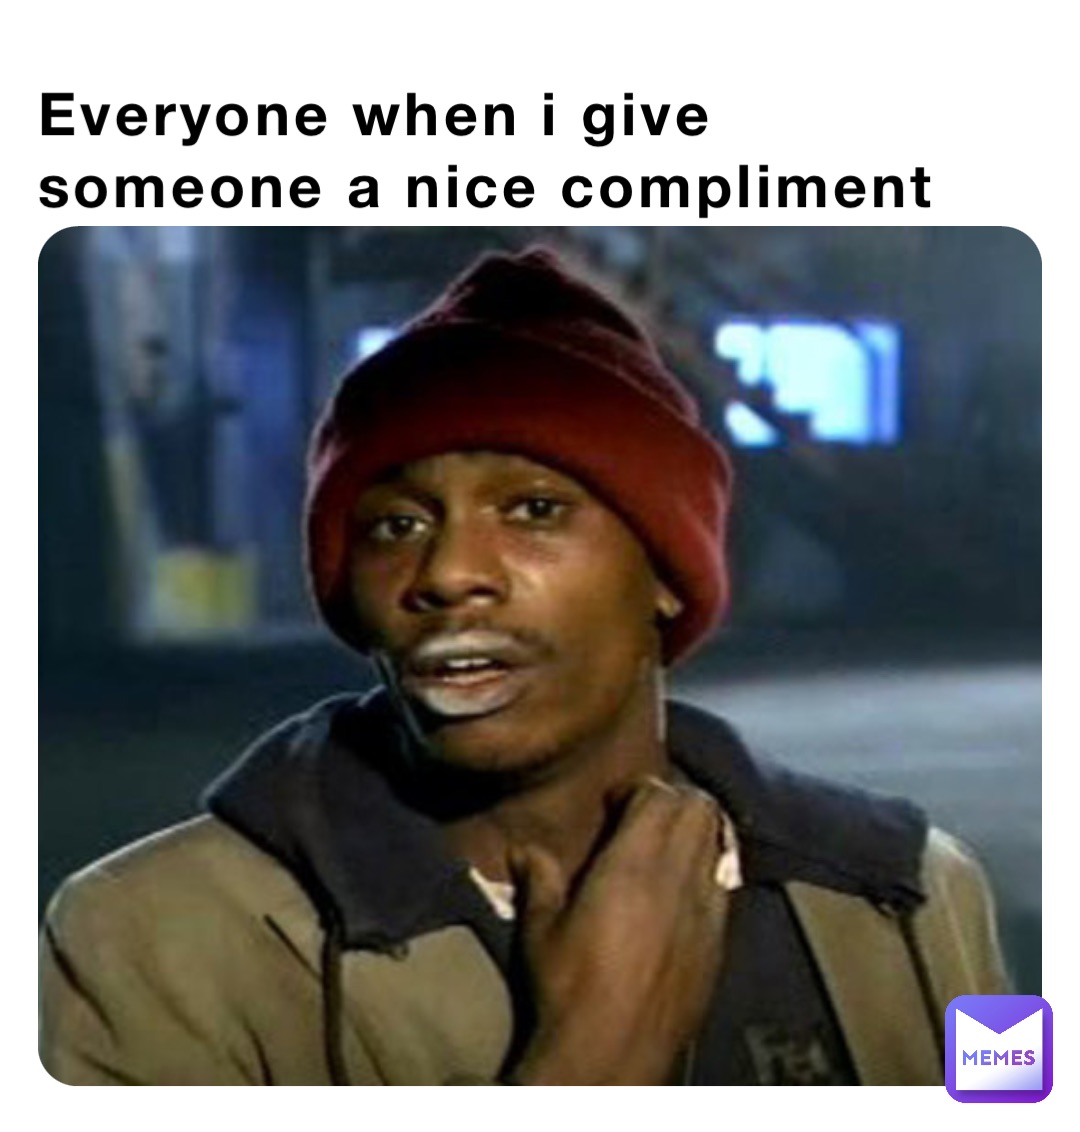 Everyone when i give someone a nice compliment